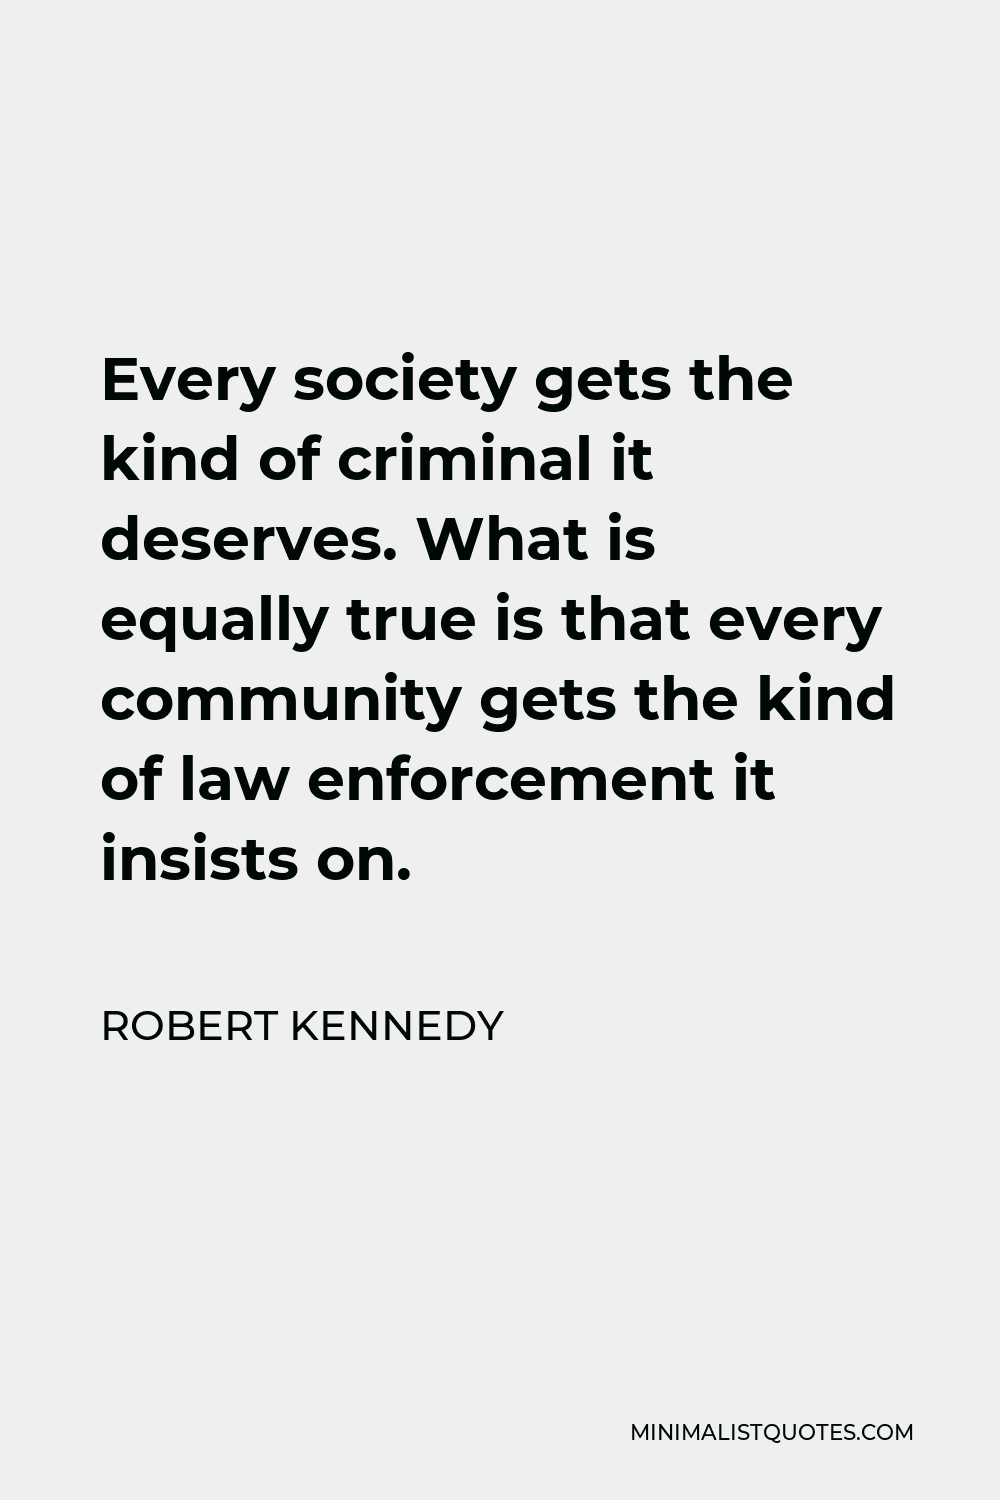 Robert Kennedy Quote - Every society gets the kind of criminal it deserves. What is equally true is that every community gets the kind of law enforcement it insists on.